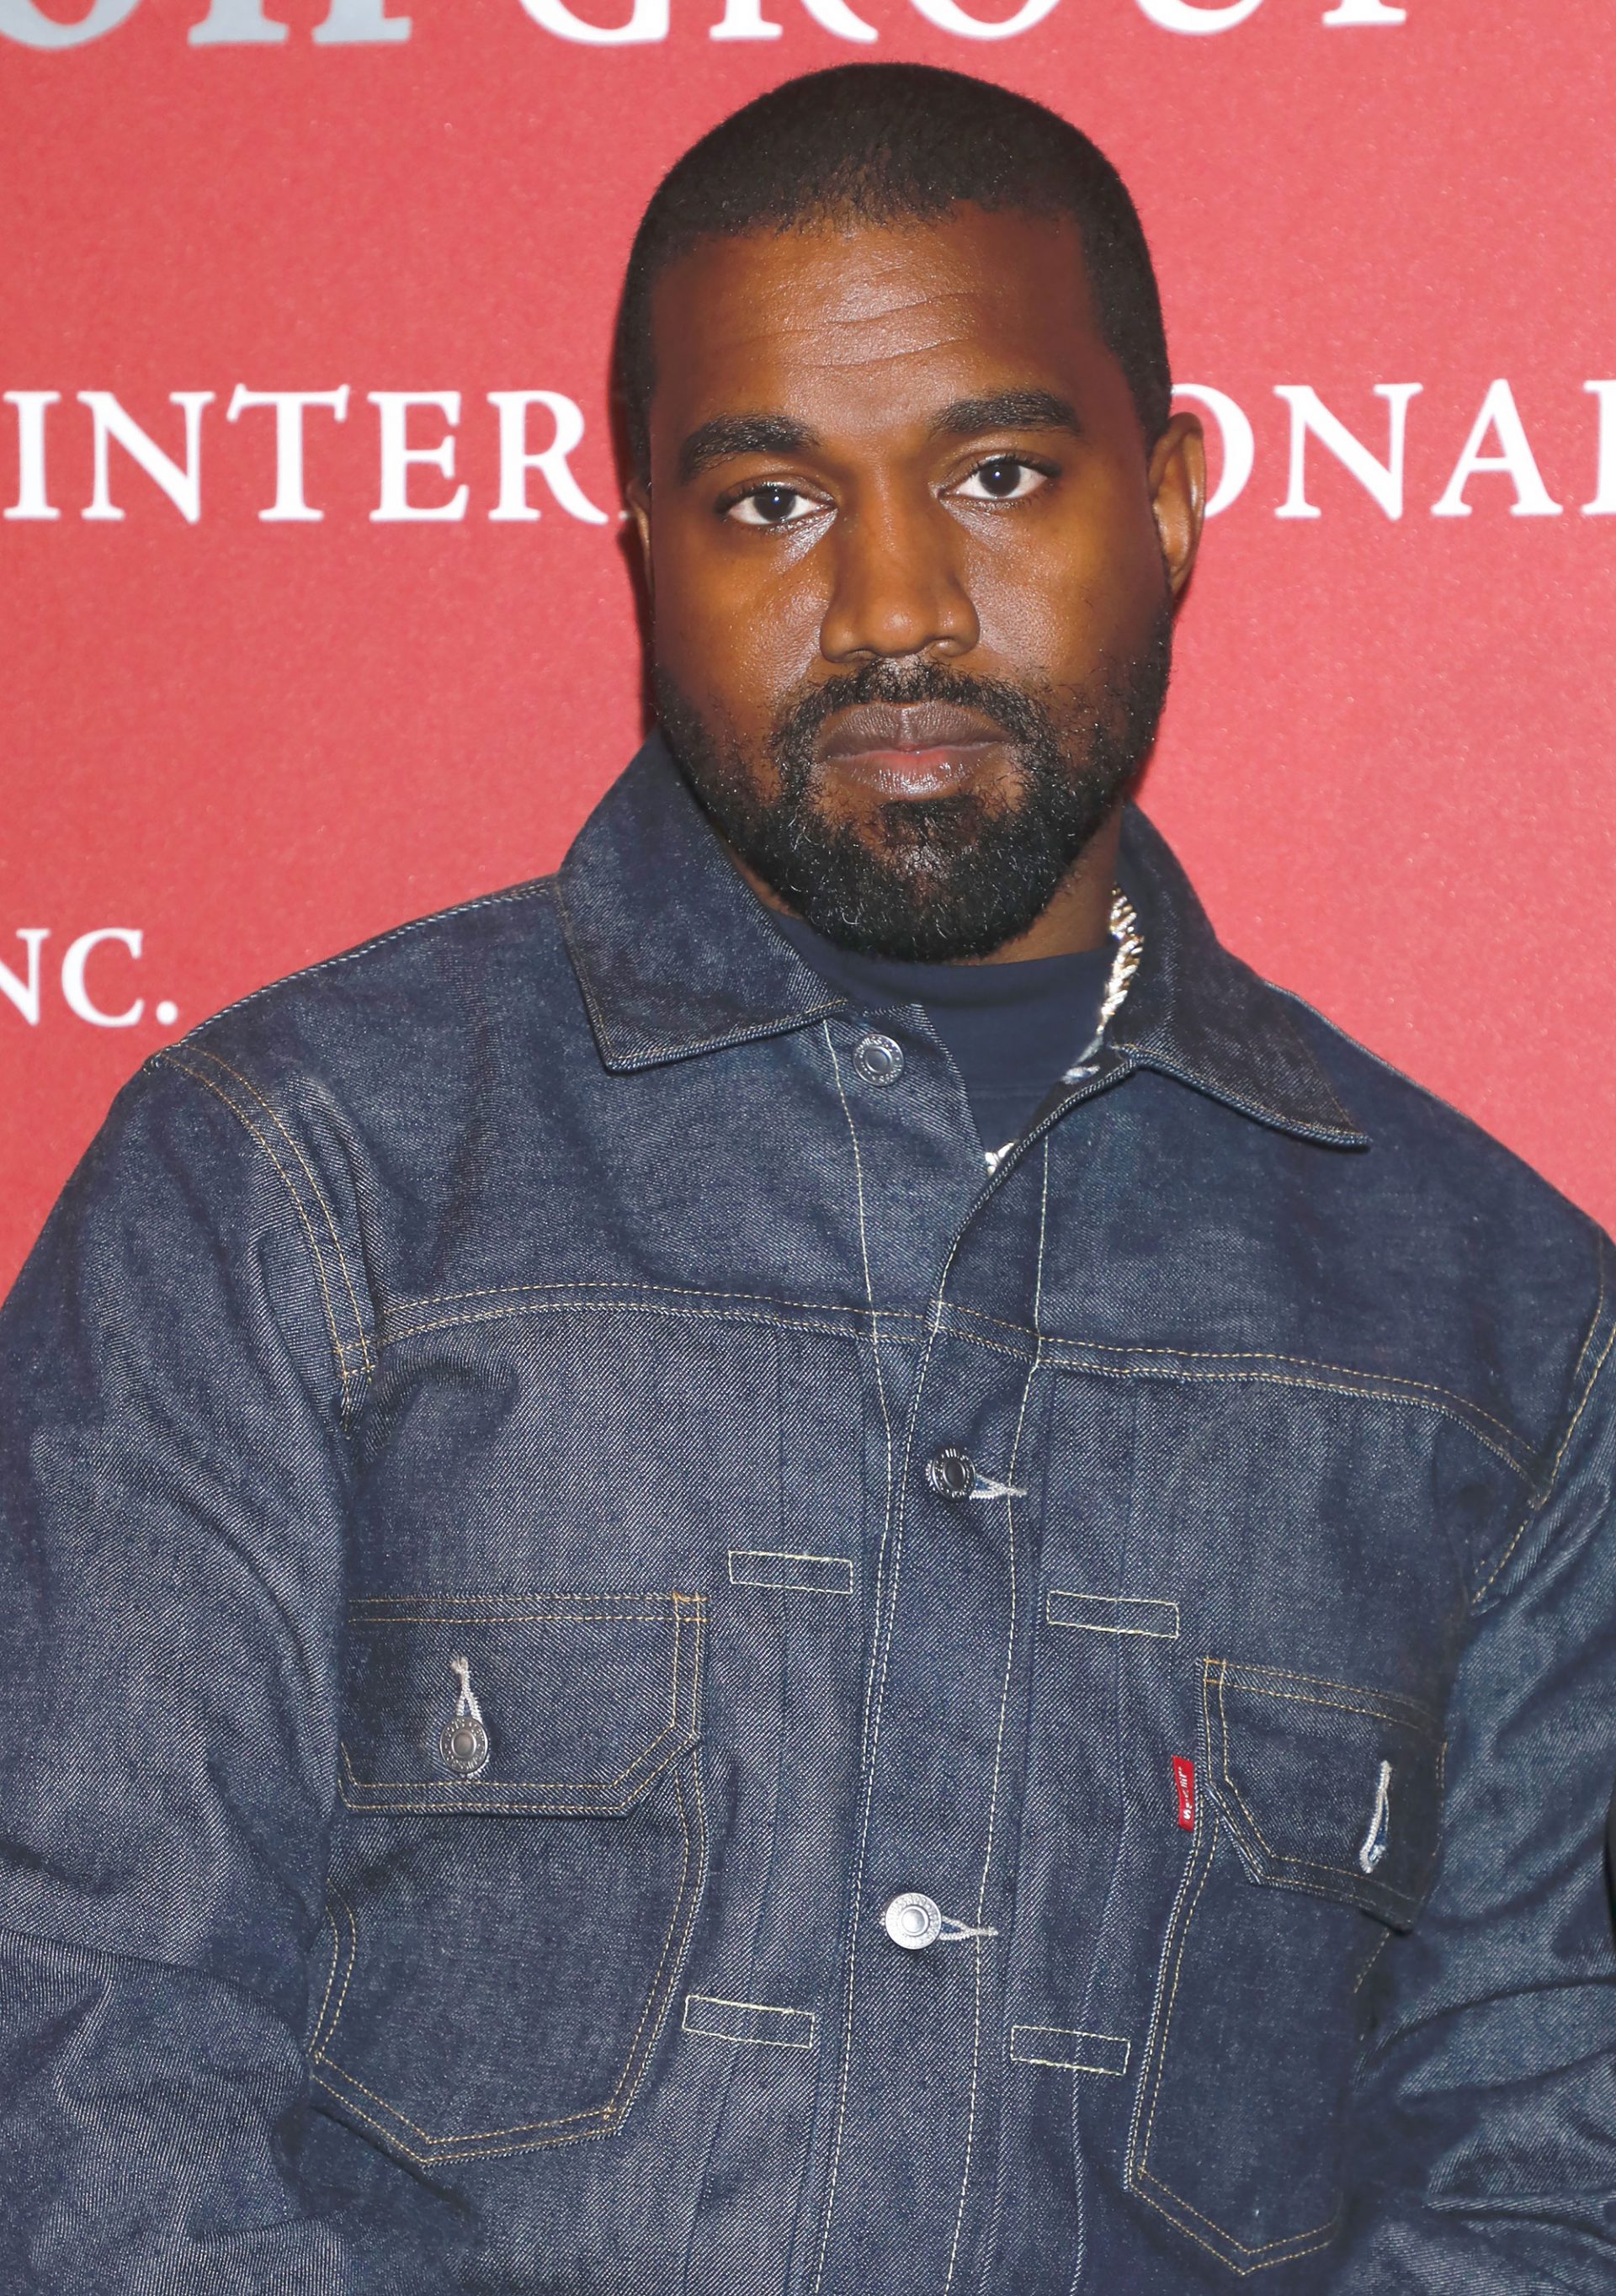 Kanye West Publicizes He’s Working for President